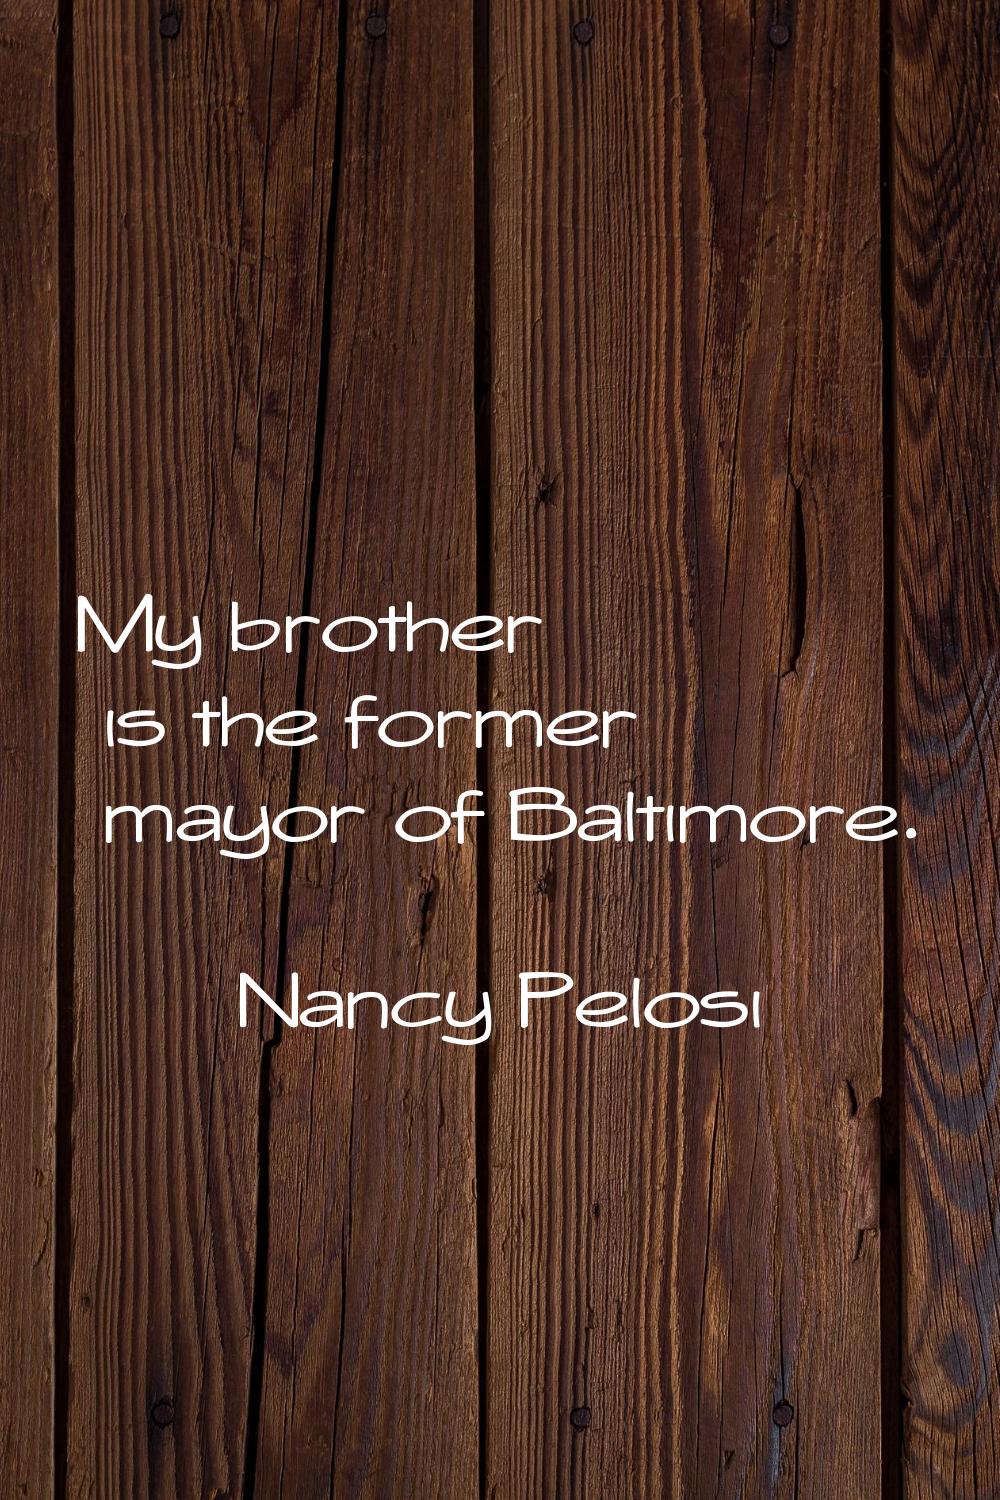 My brother is the former mayor of Baltimore.